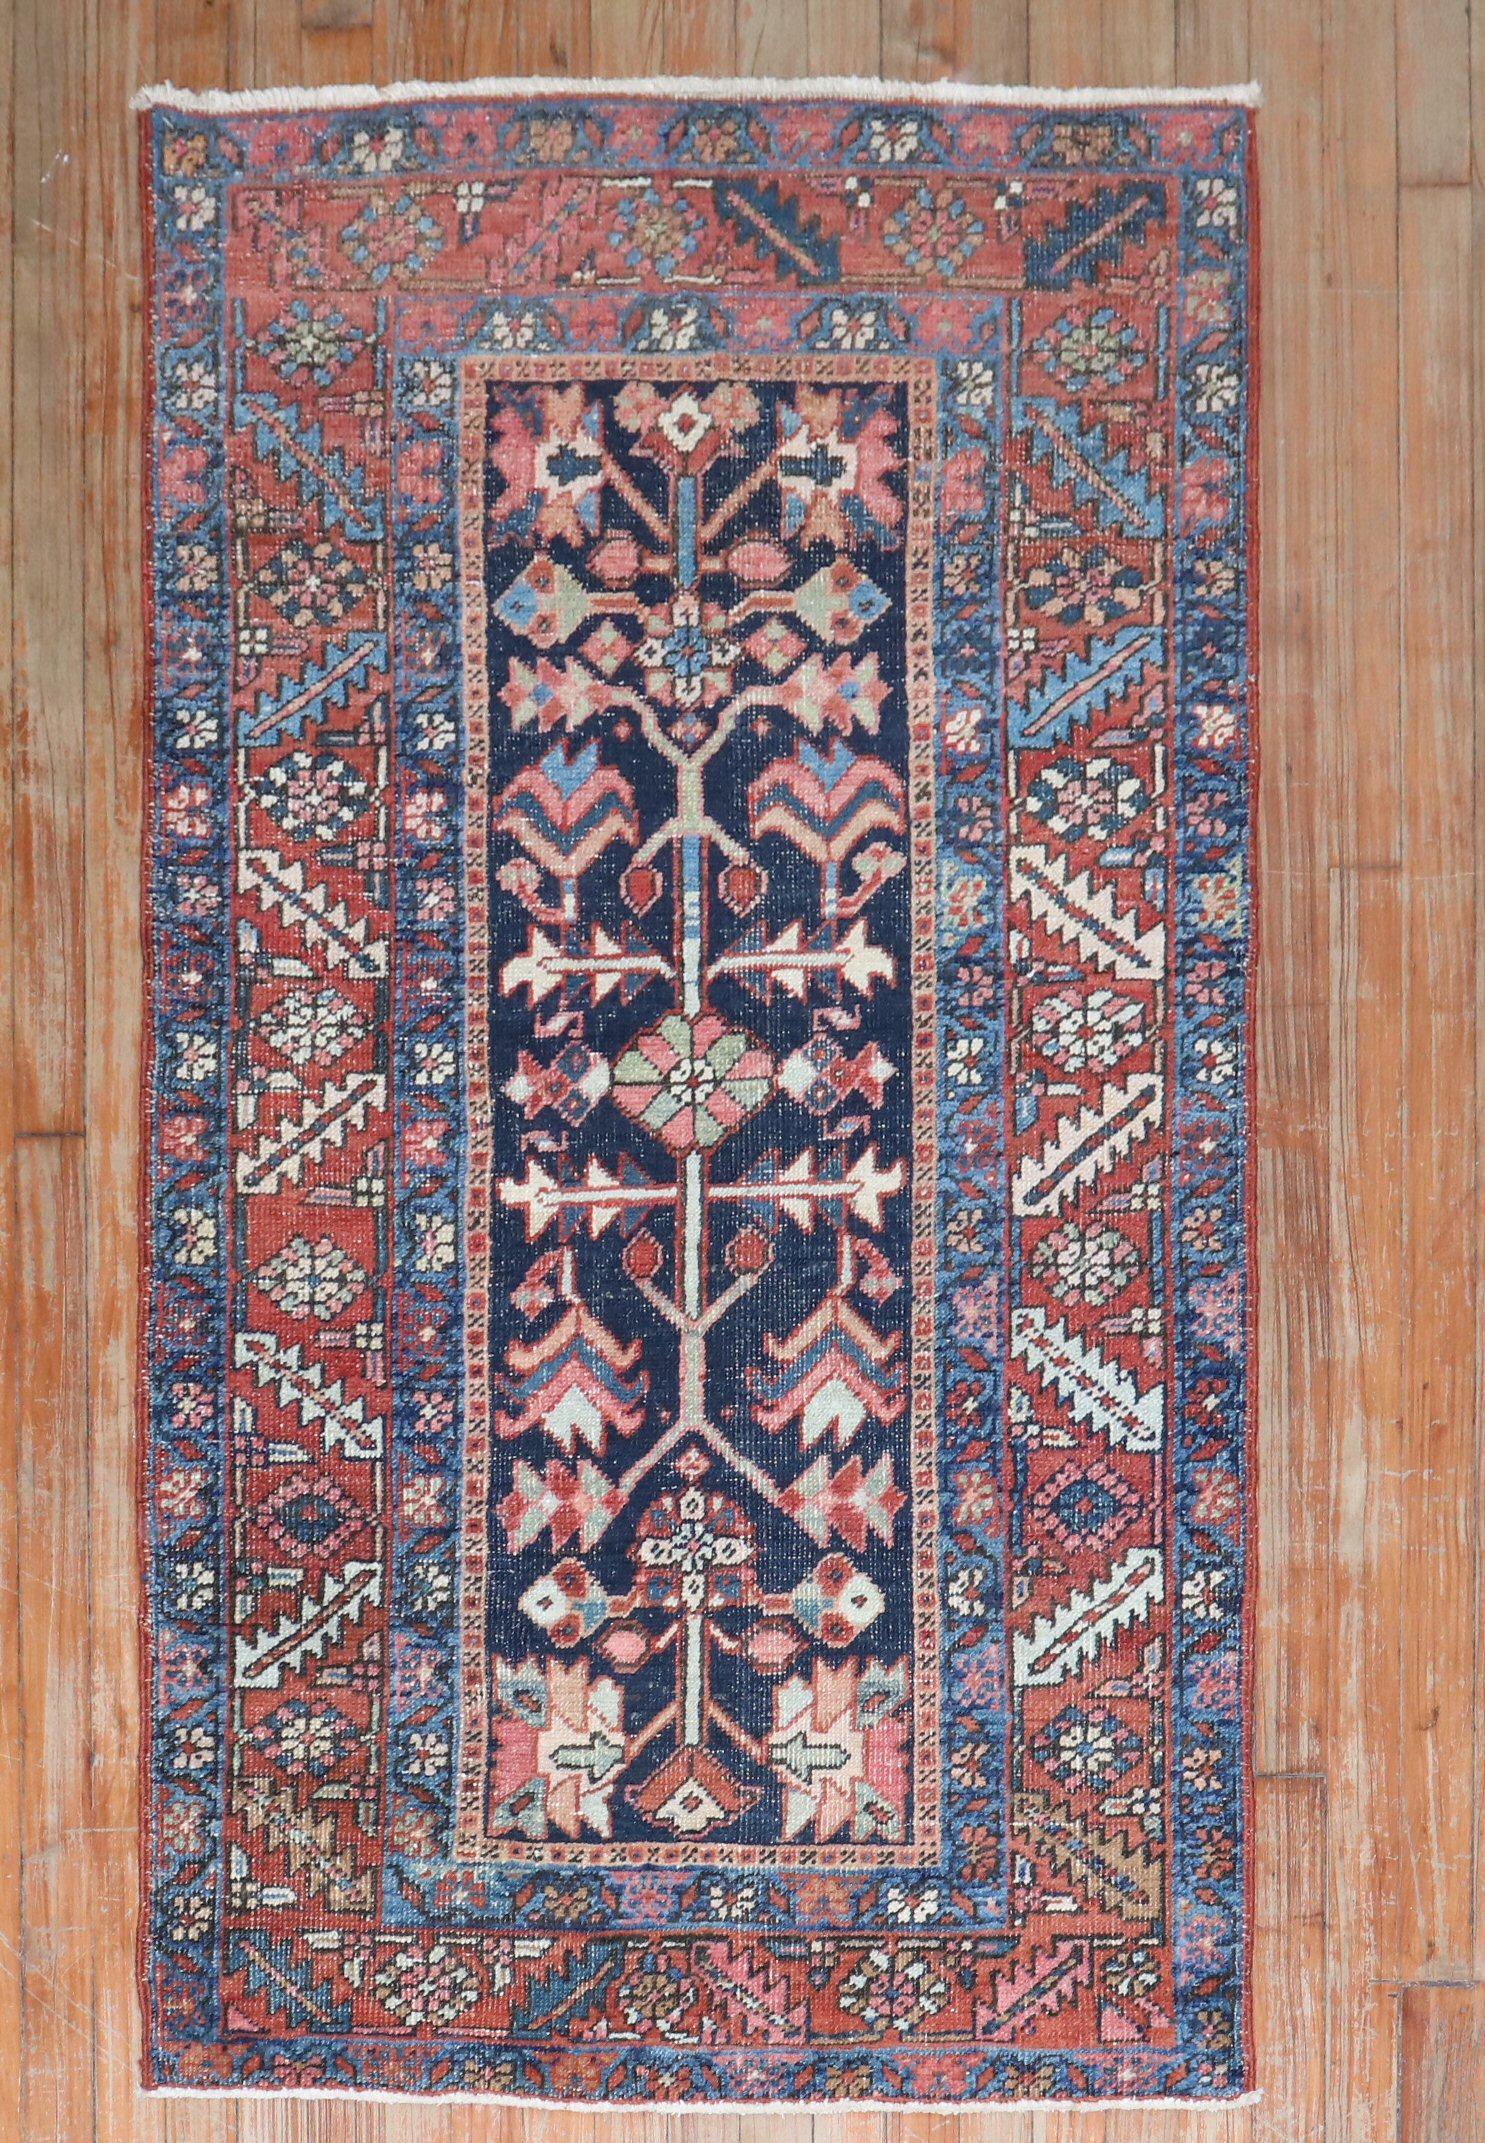 Antique Persian Heriz runner from the 2nd quarter of the 20th century with an all-over geometric motif on a navy blue ground.

2'11'' x 5'3''